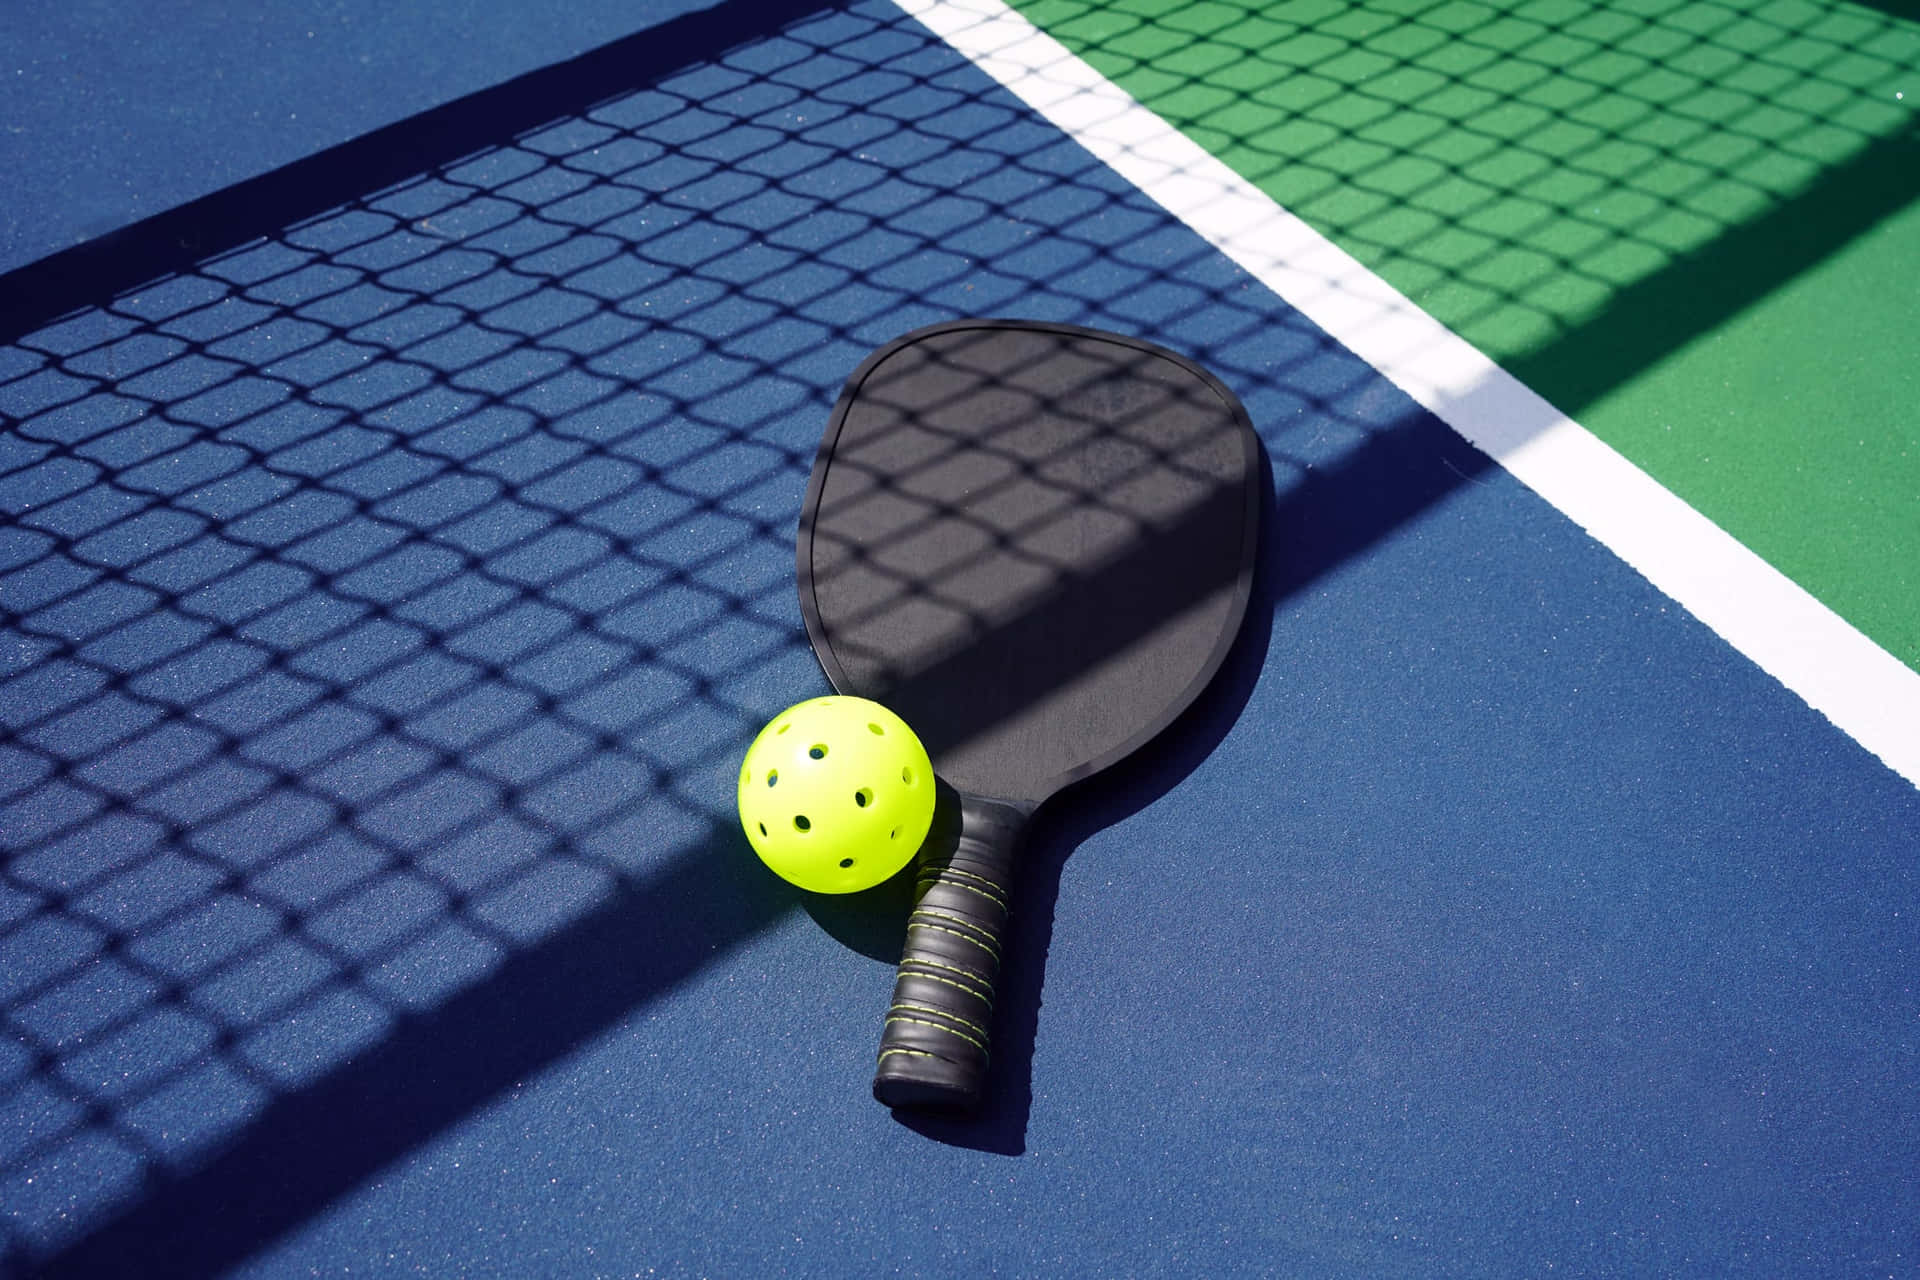 A Tennis Racket And Ball On A Tennis Court